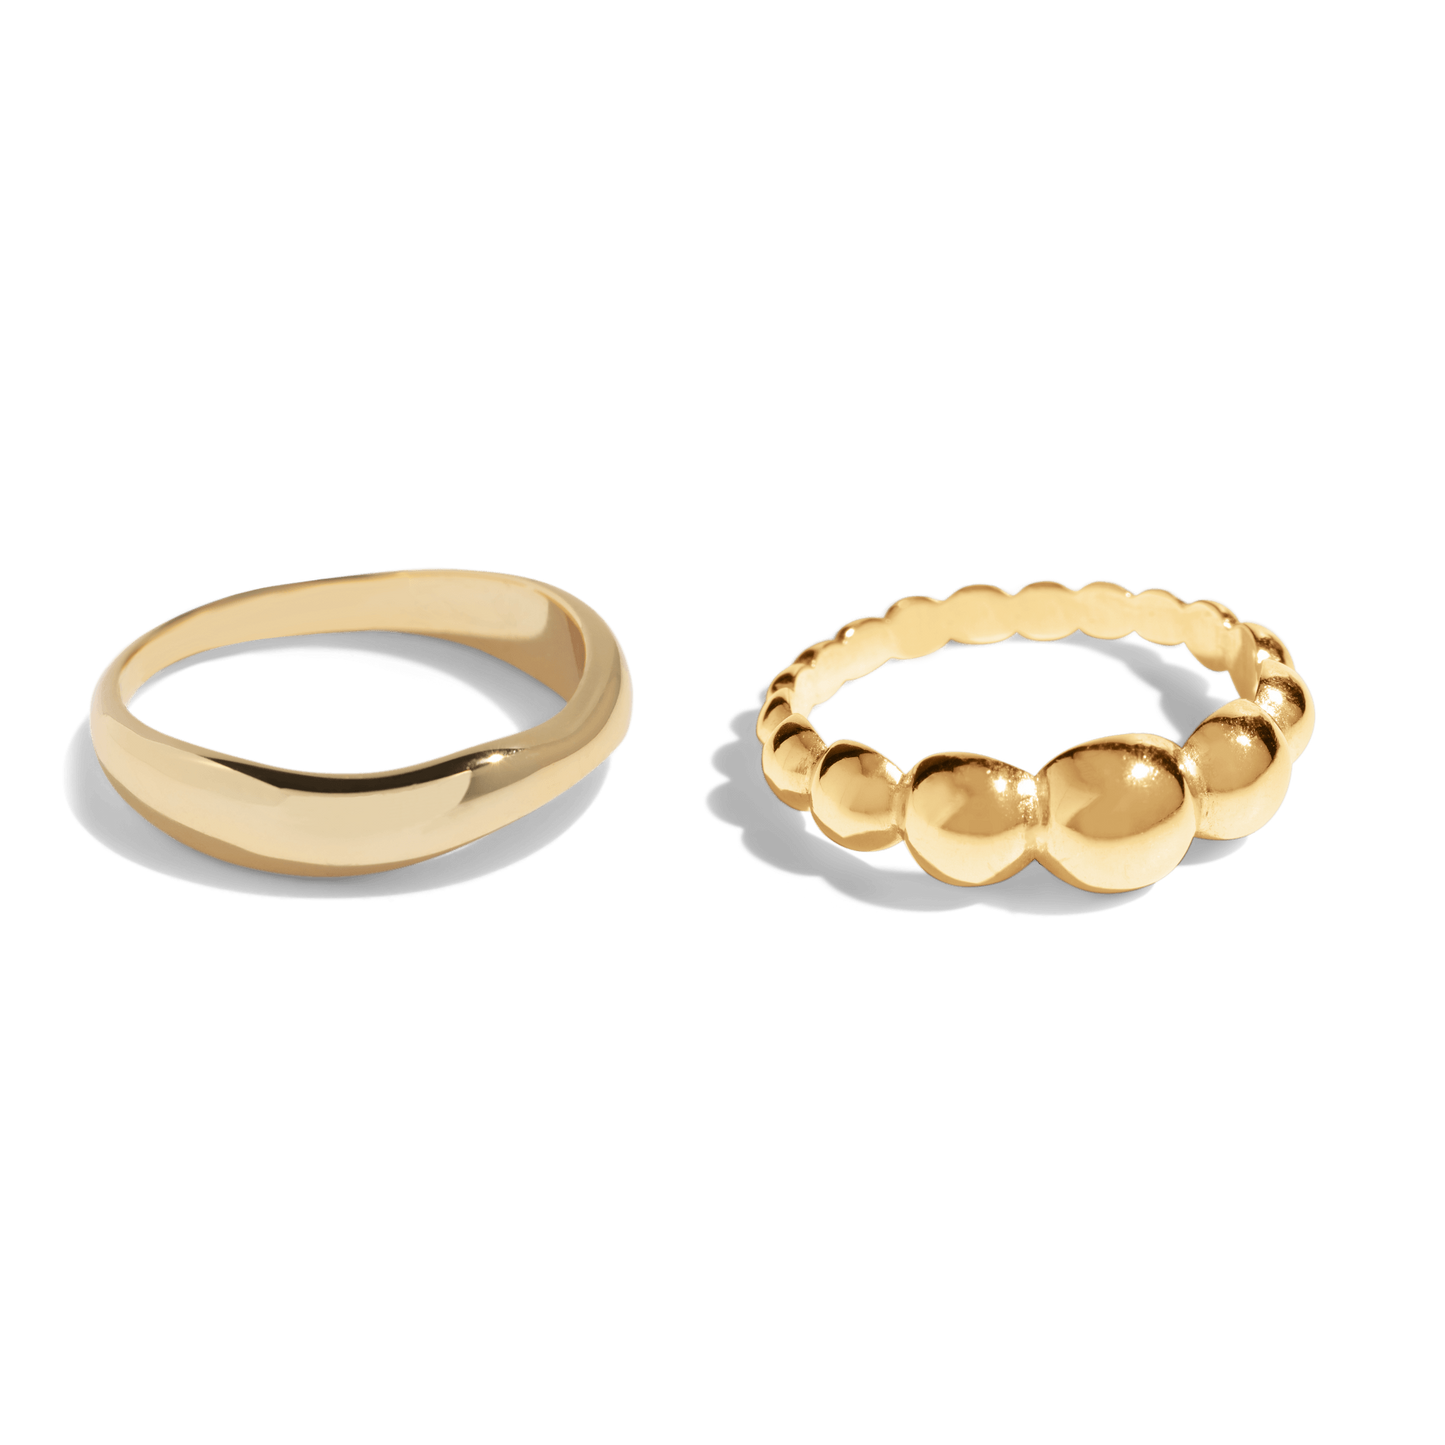 THE GO TO RING SET - Solid 14k gold